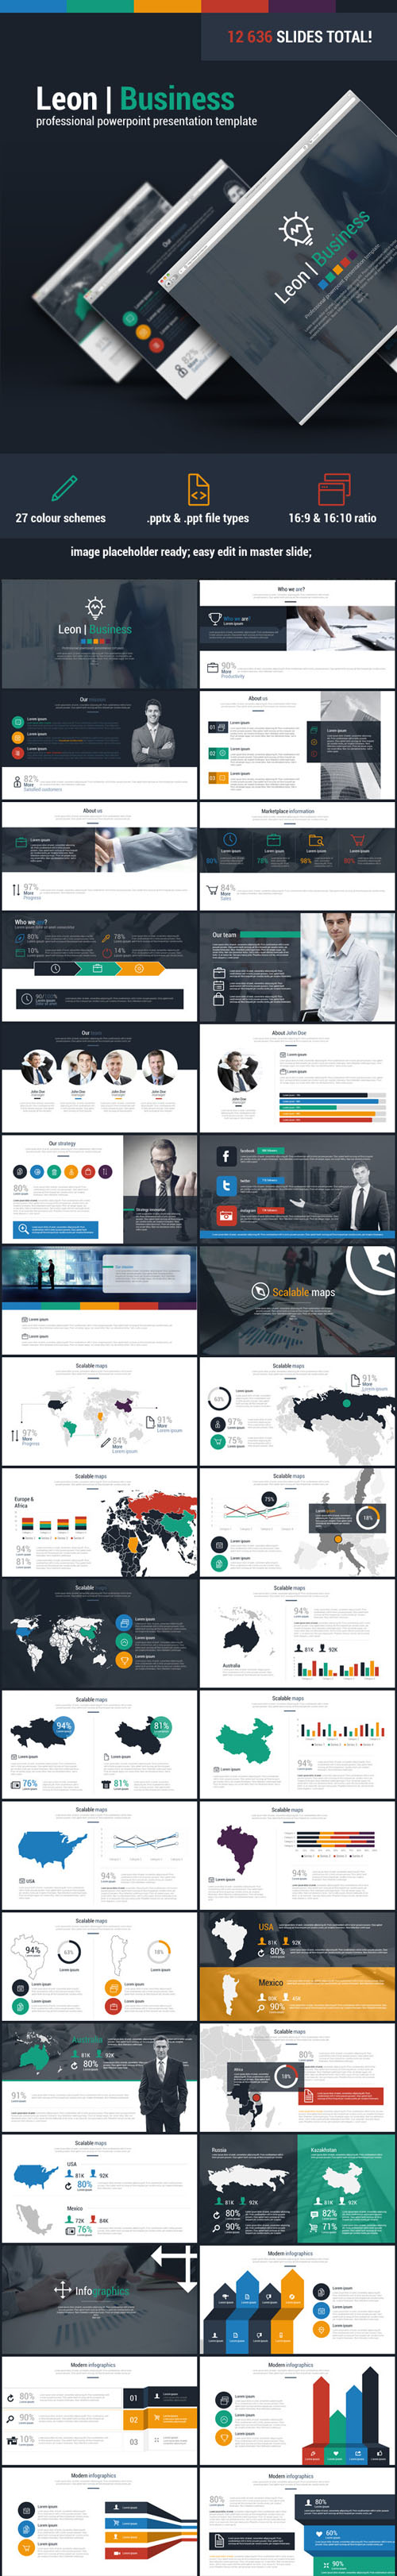 Graphicriver - Leon Business Powerpoint Presentation Template - id 11084650